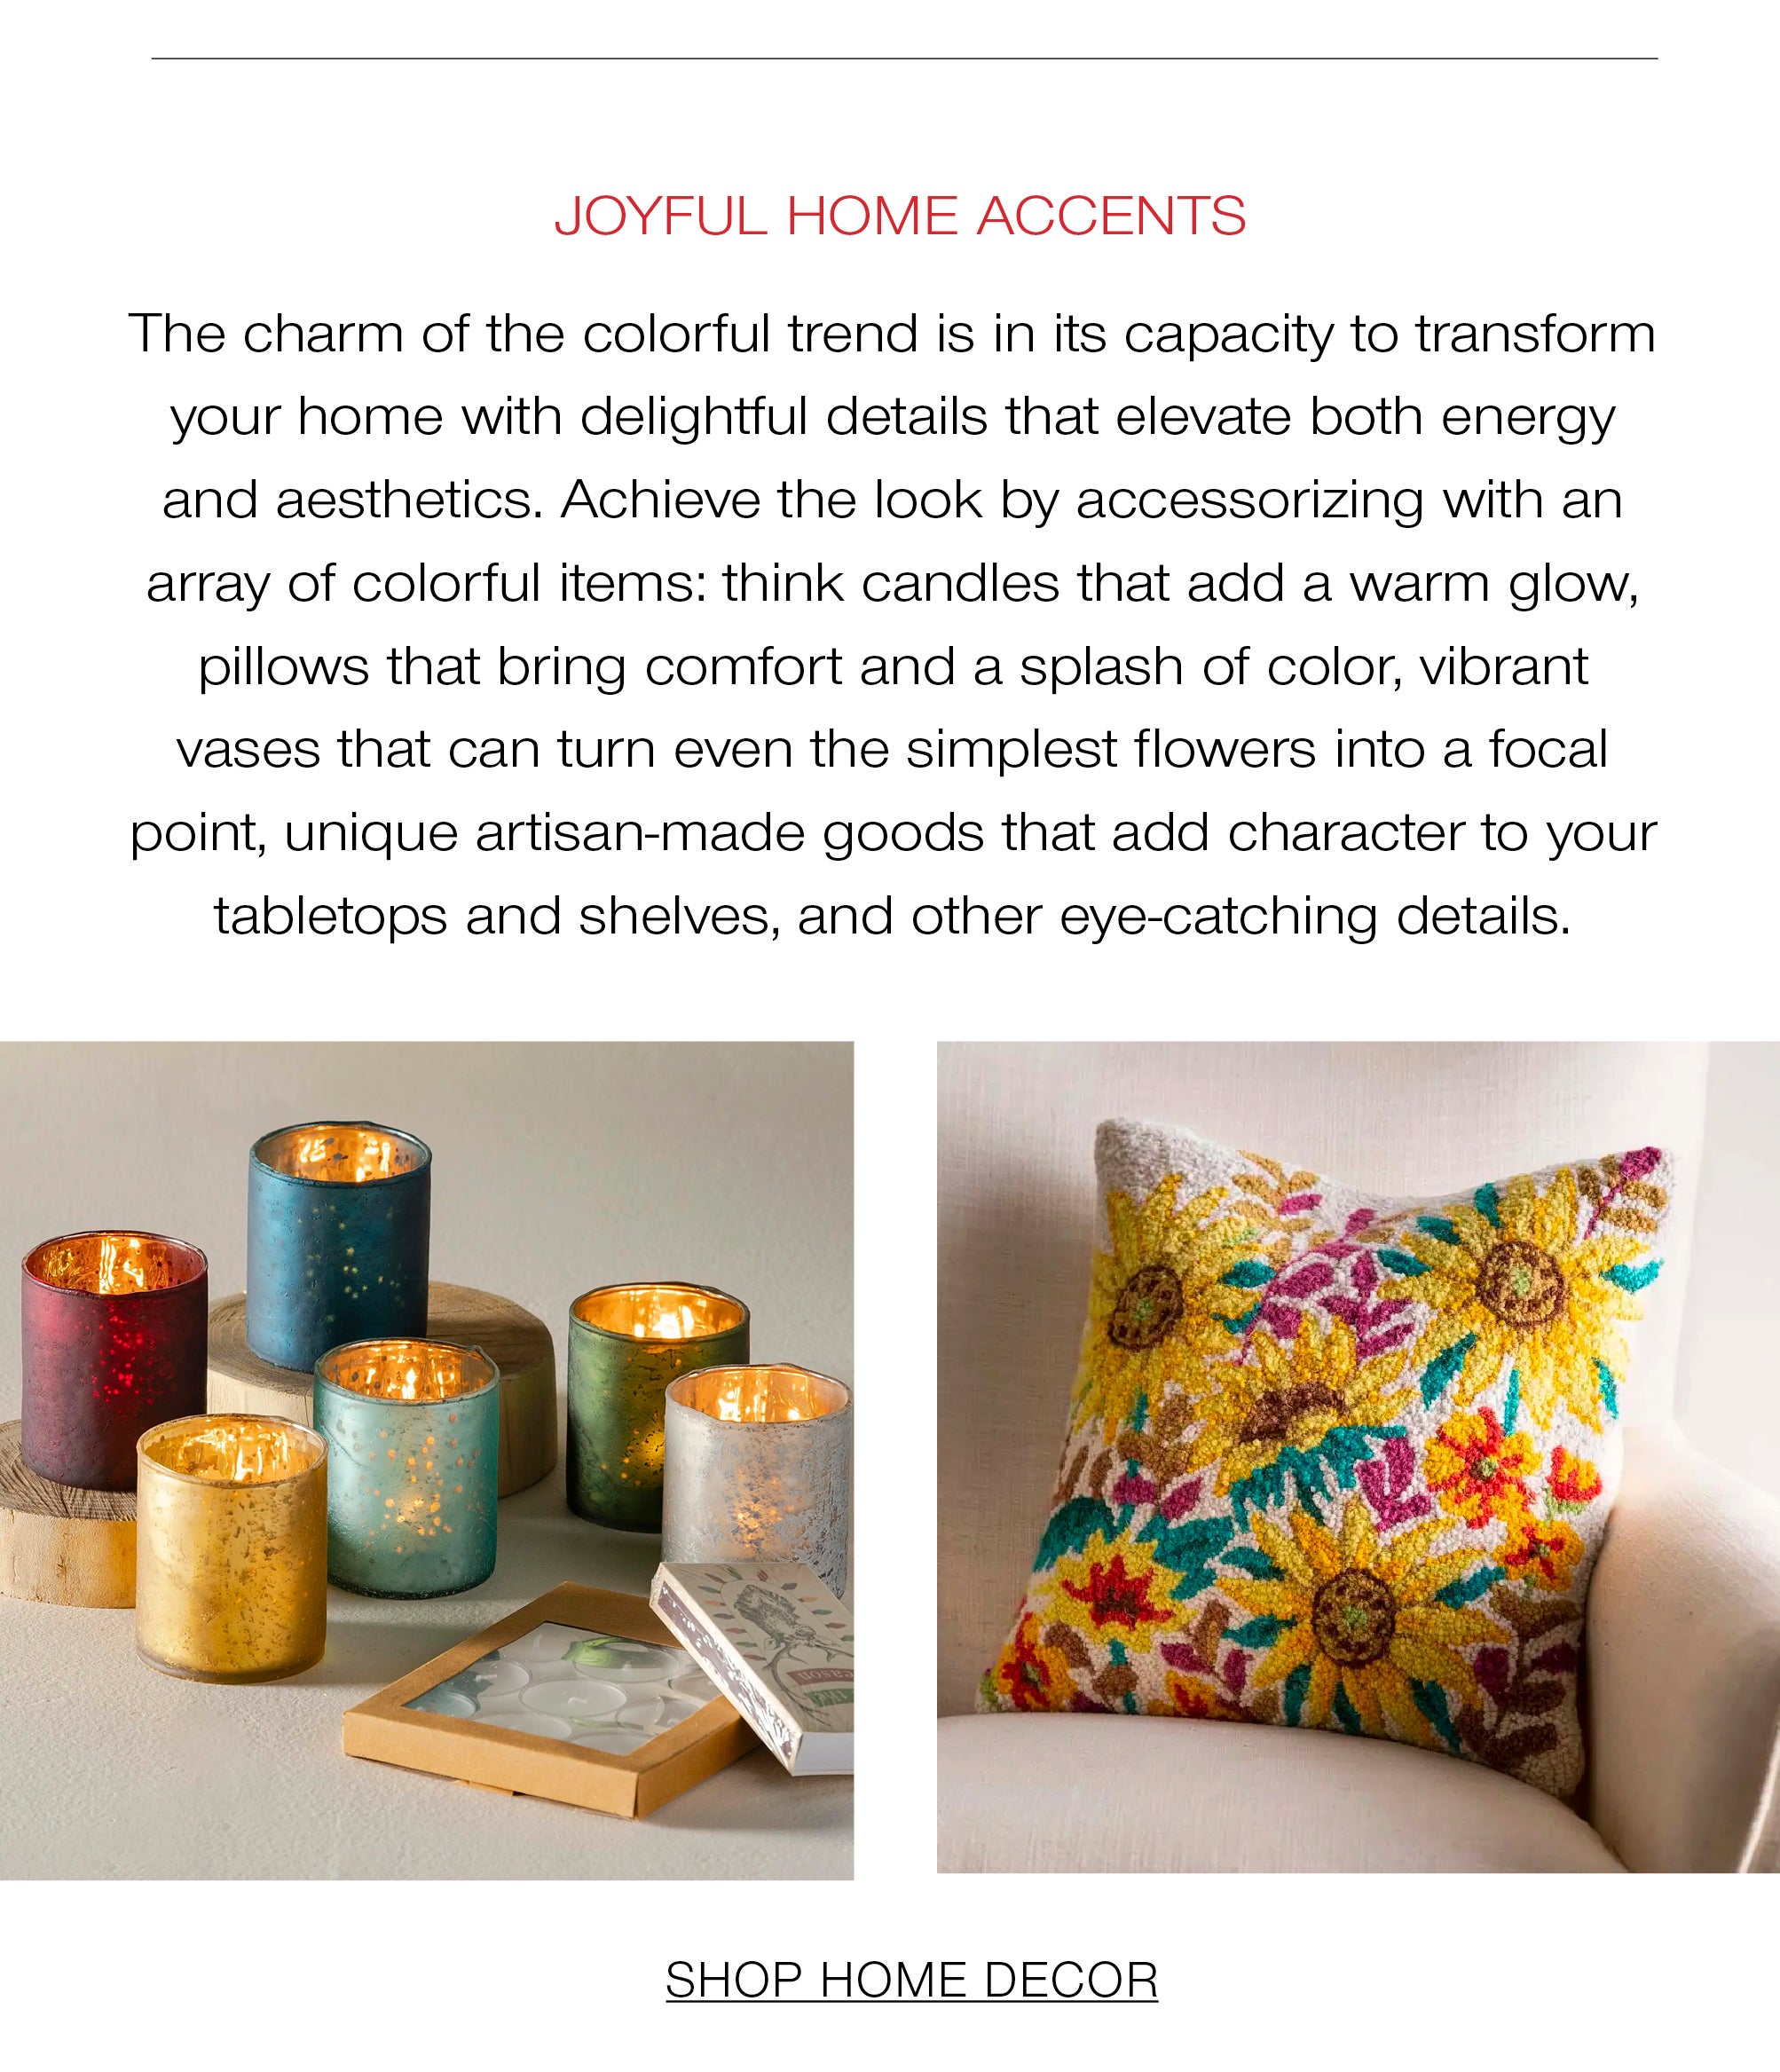 Joyful Home Accents<br />The charm of the colorful trend is in its capacity to transform your home with delightful details that elevate both energy and aesthetics. Achieve the look by accessorizing with an array of colorful items: think candles that add a warm glow, pillows that bring comfort and a splash of color, vibrant vases that can turn even the simplest flowers into a focal point, unique artisan-made goods that add character to your tabletops and shelves, and other eye-catching details.